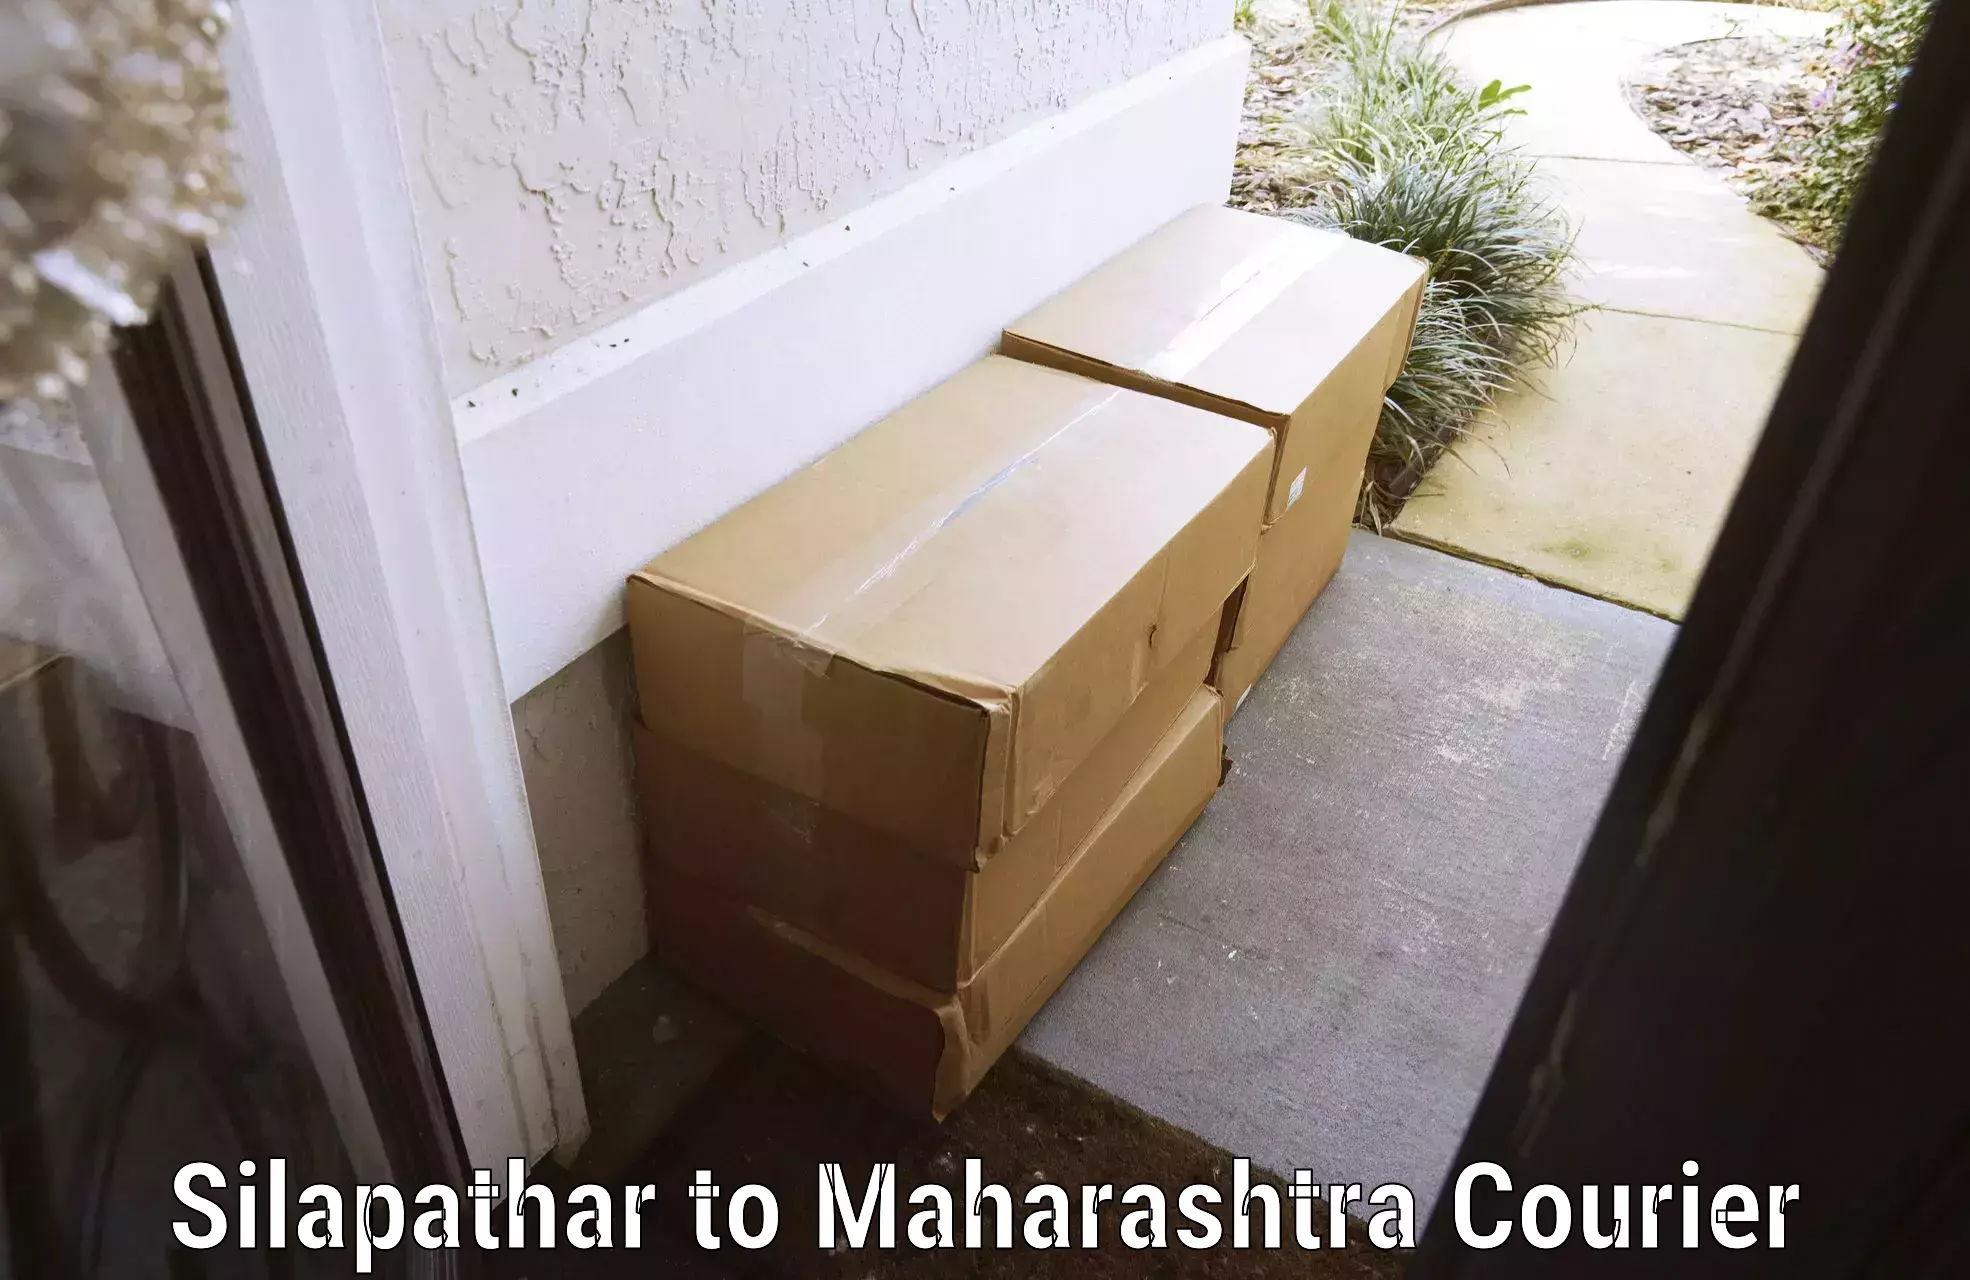 Personal effects shipping Silapathar to Borivali